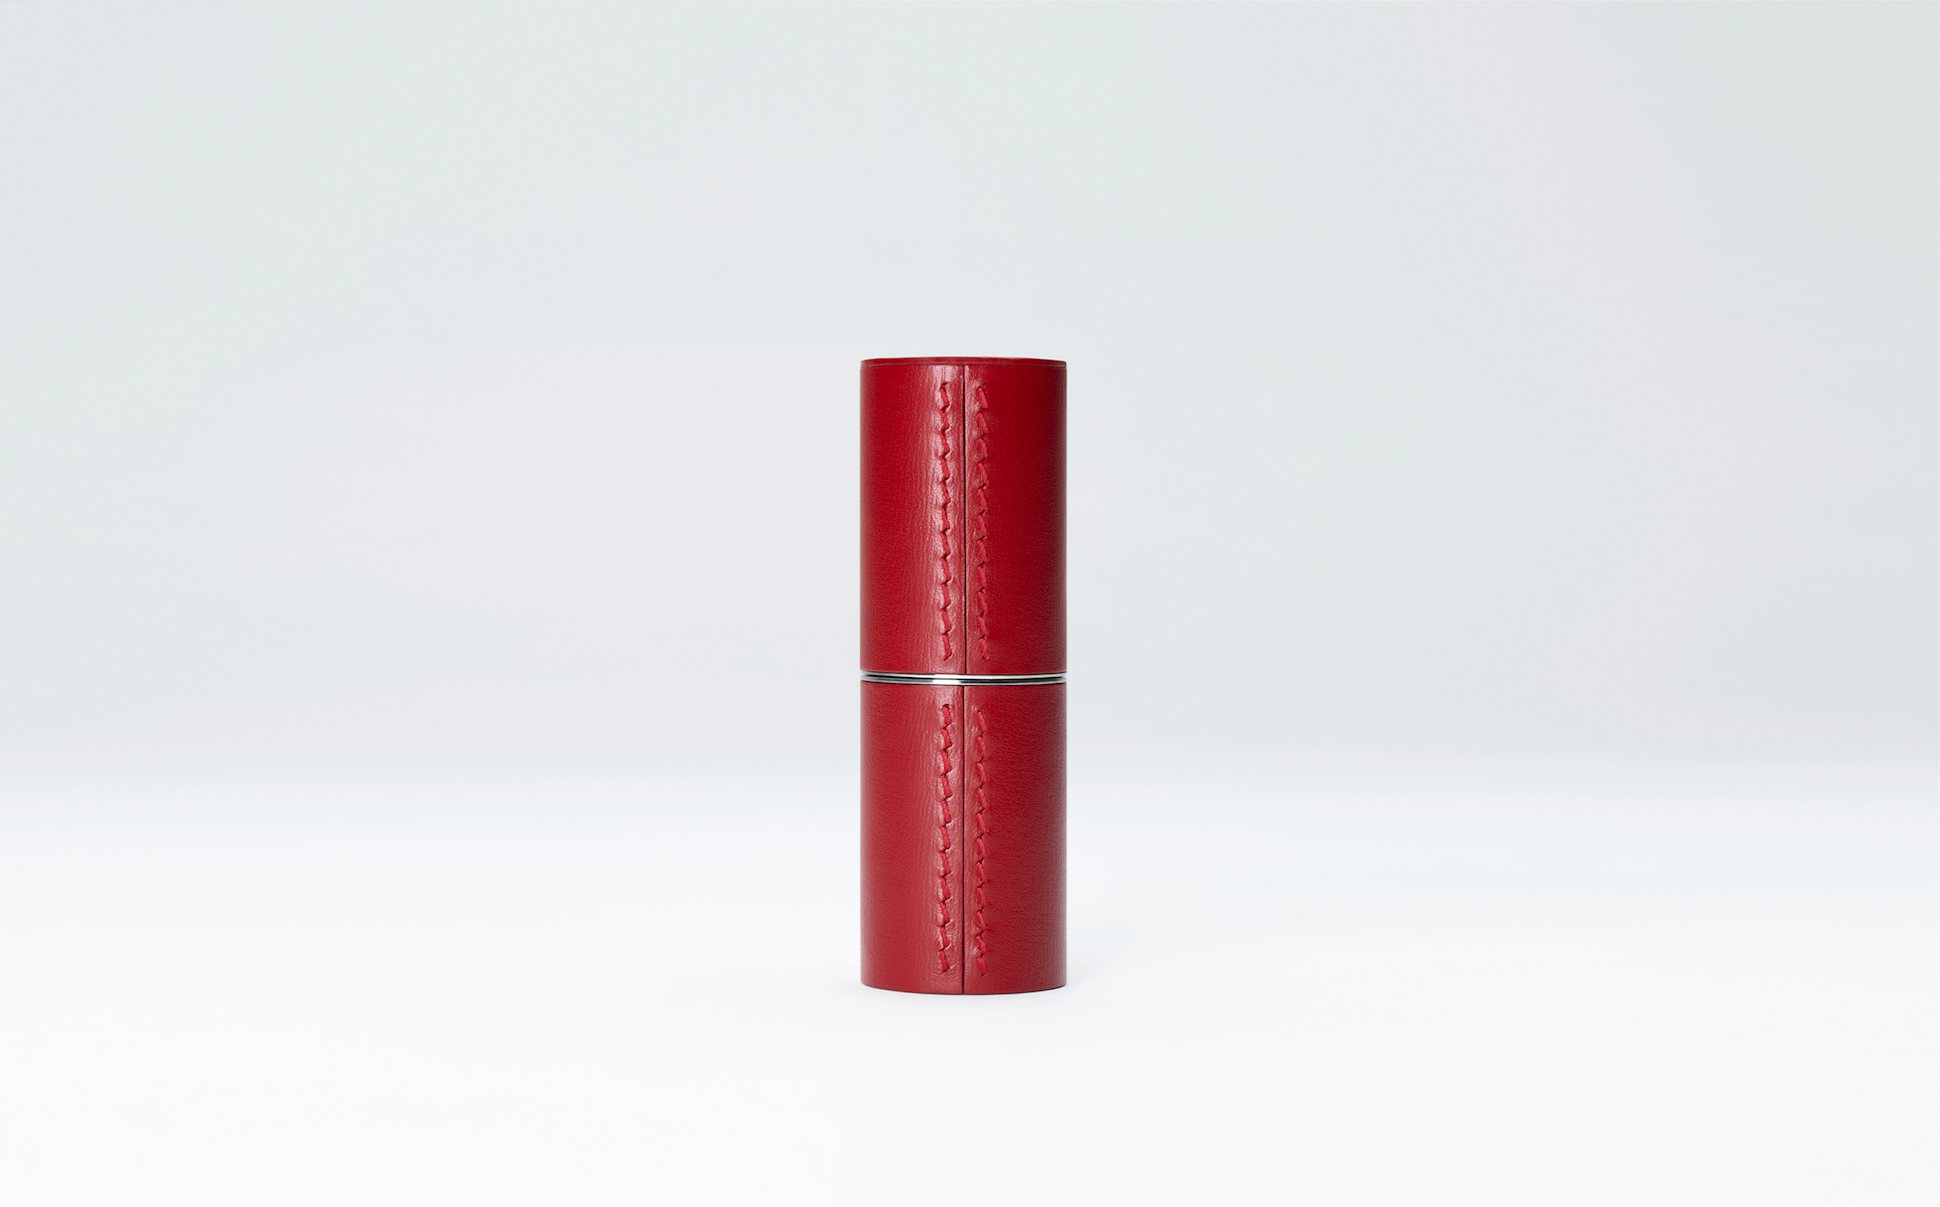 La bouche rouge upcycled fine leather case in Red